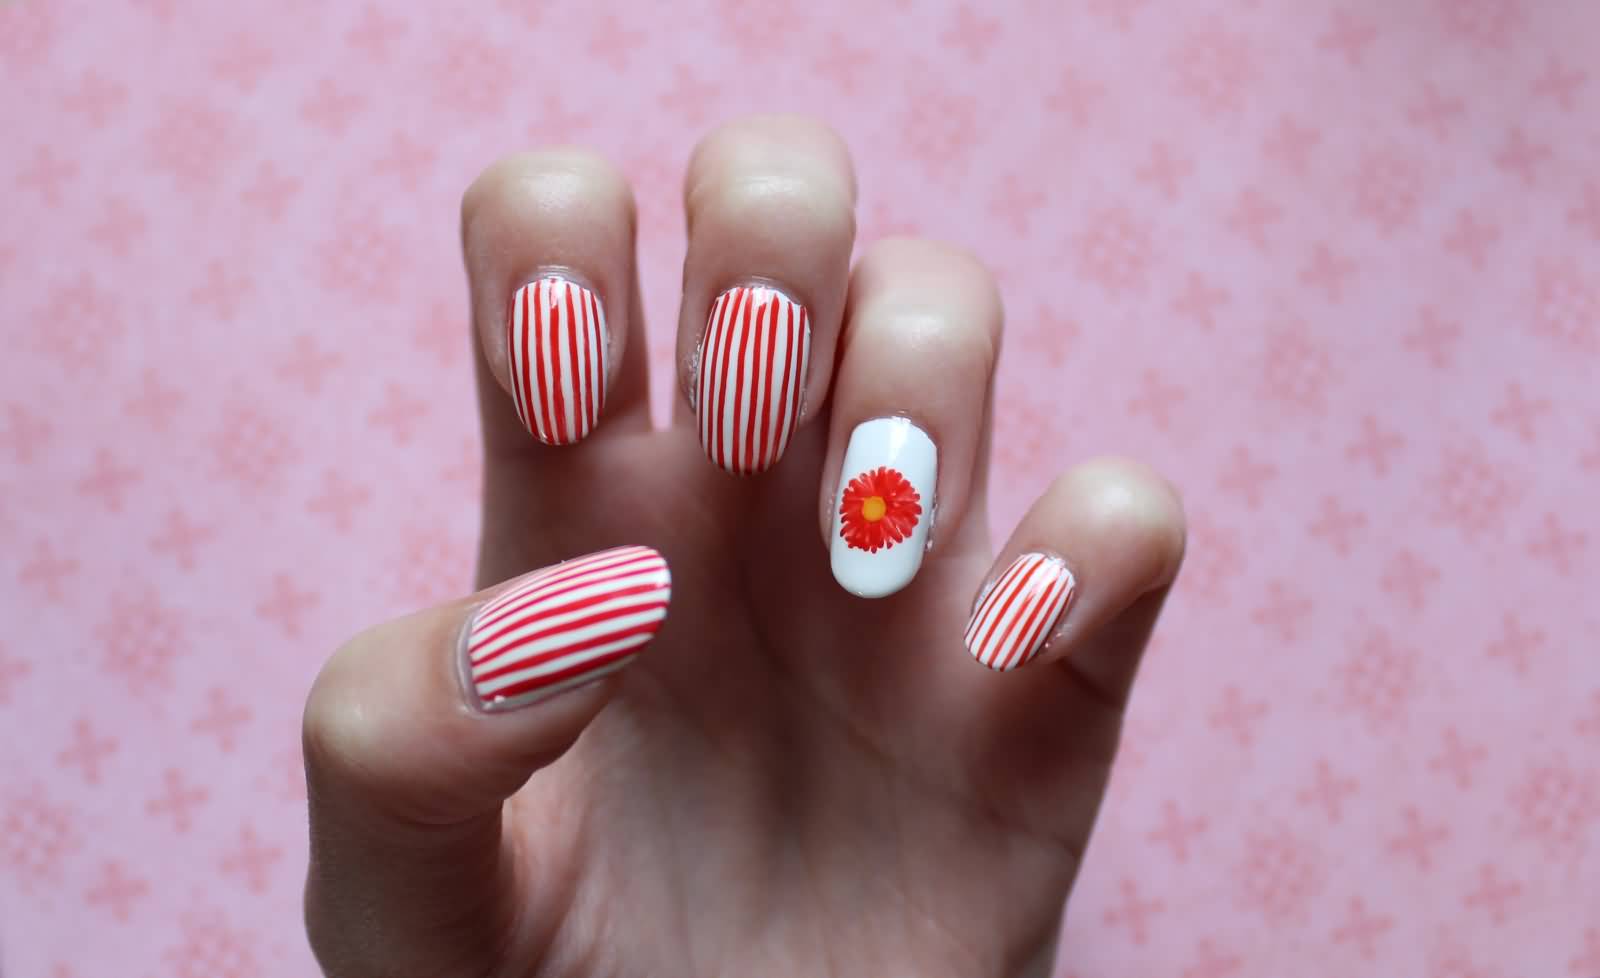 Stripes Nails With Orange Flower Accent Nail Art